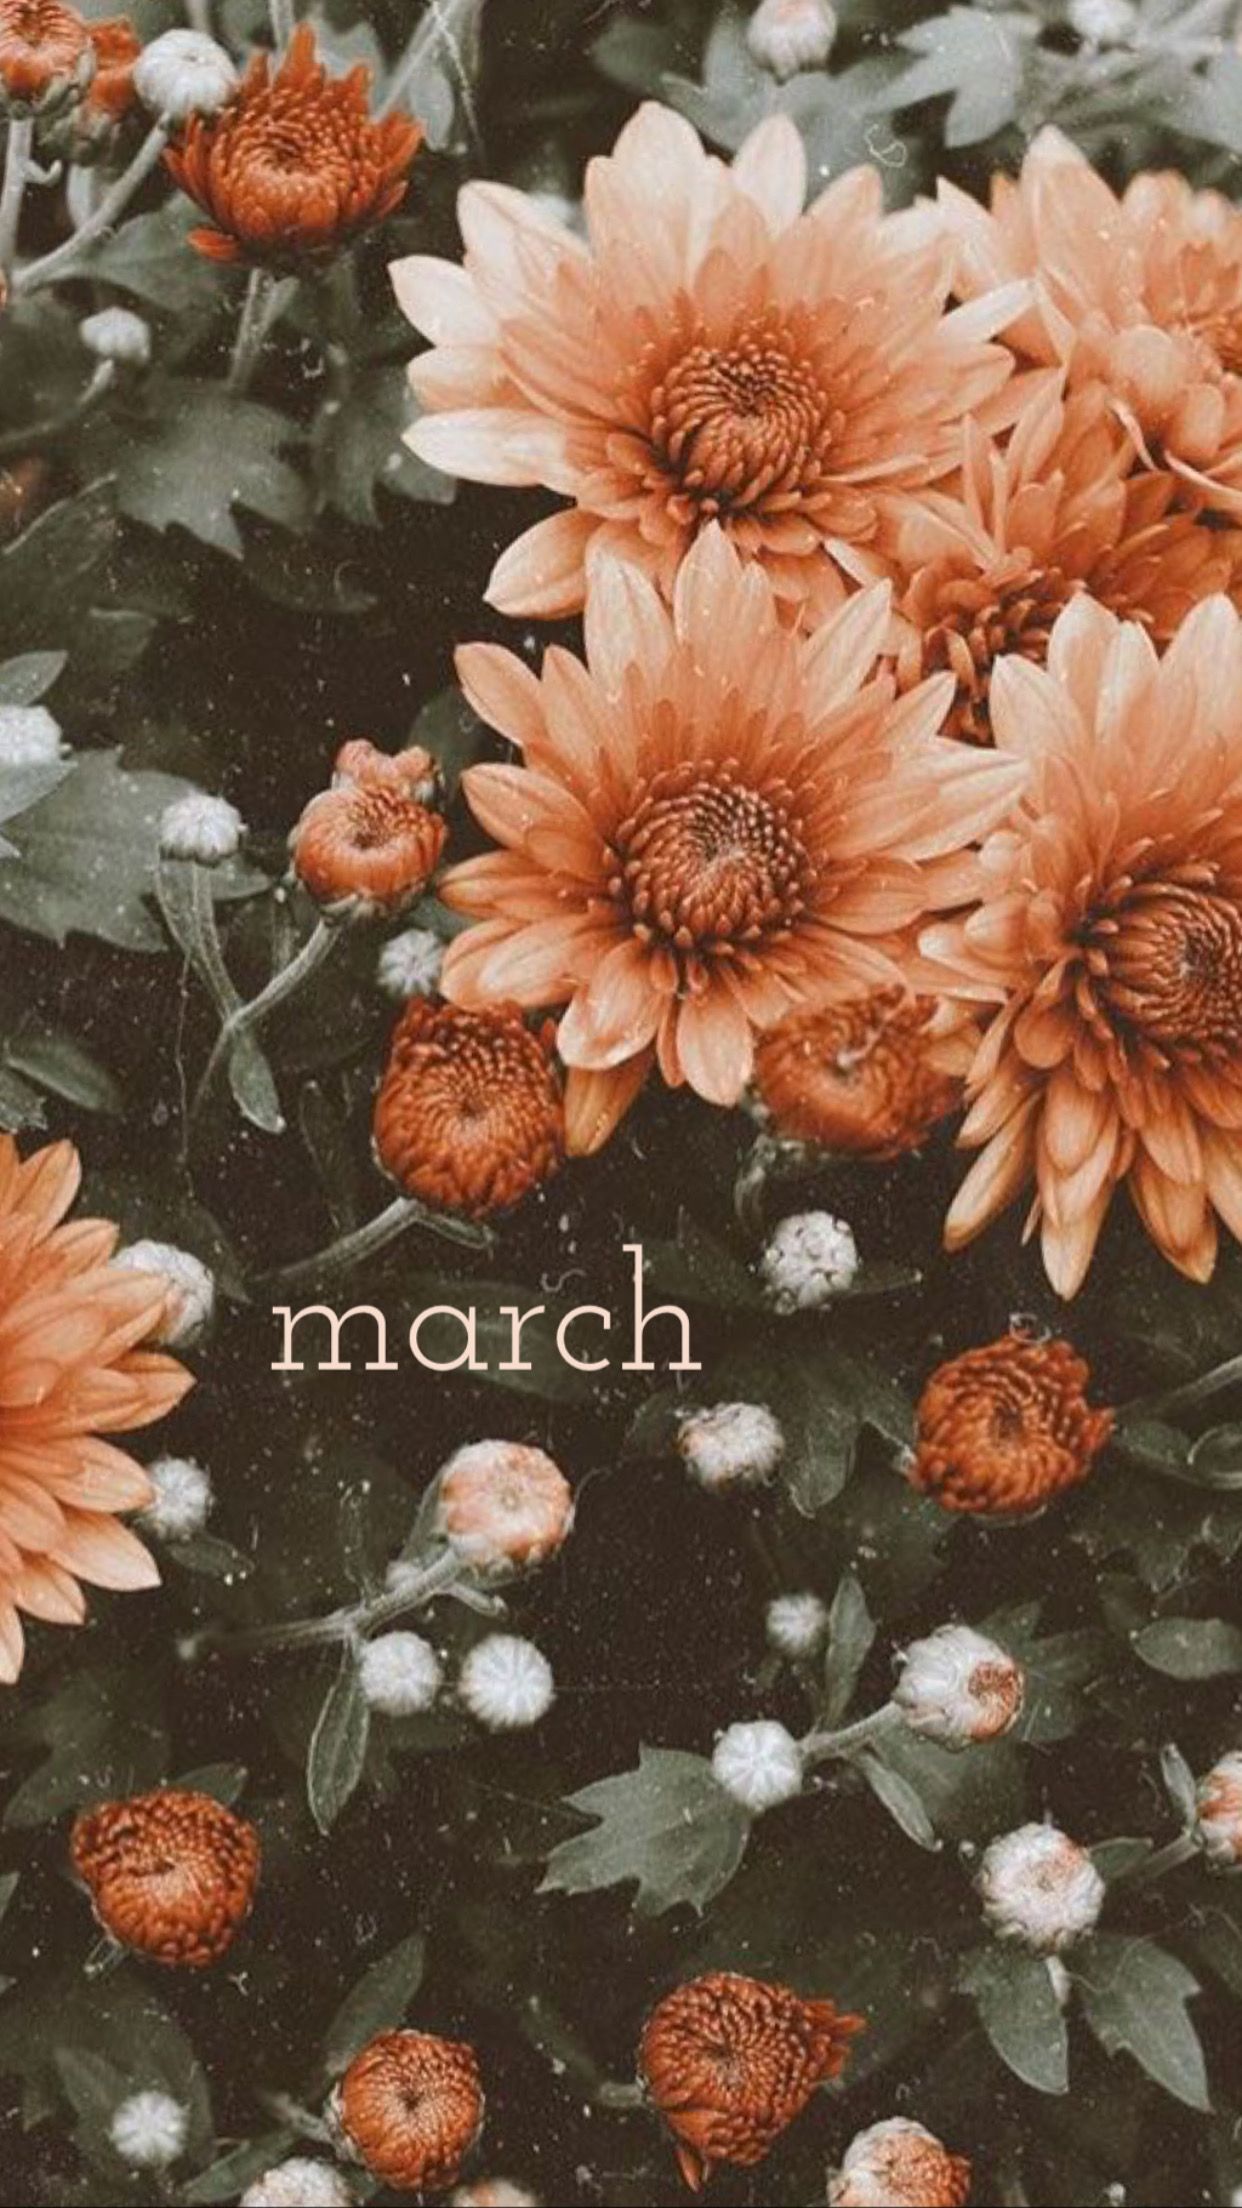 Aesthetic wallpaper for March with flowers in the background - March